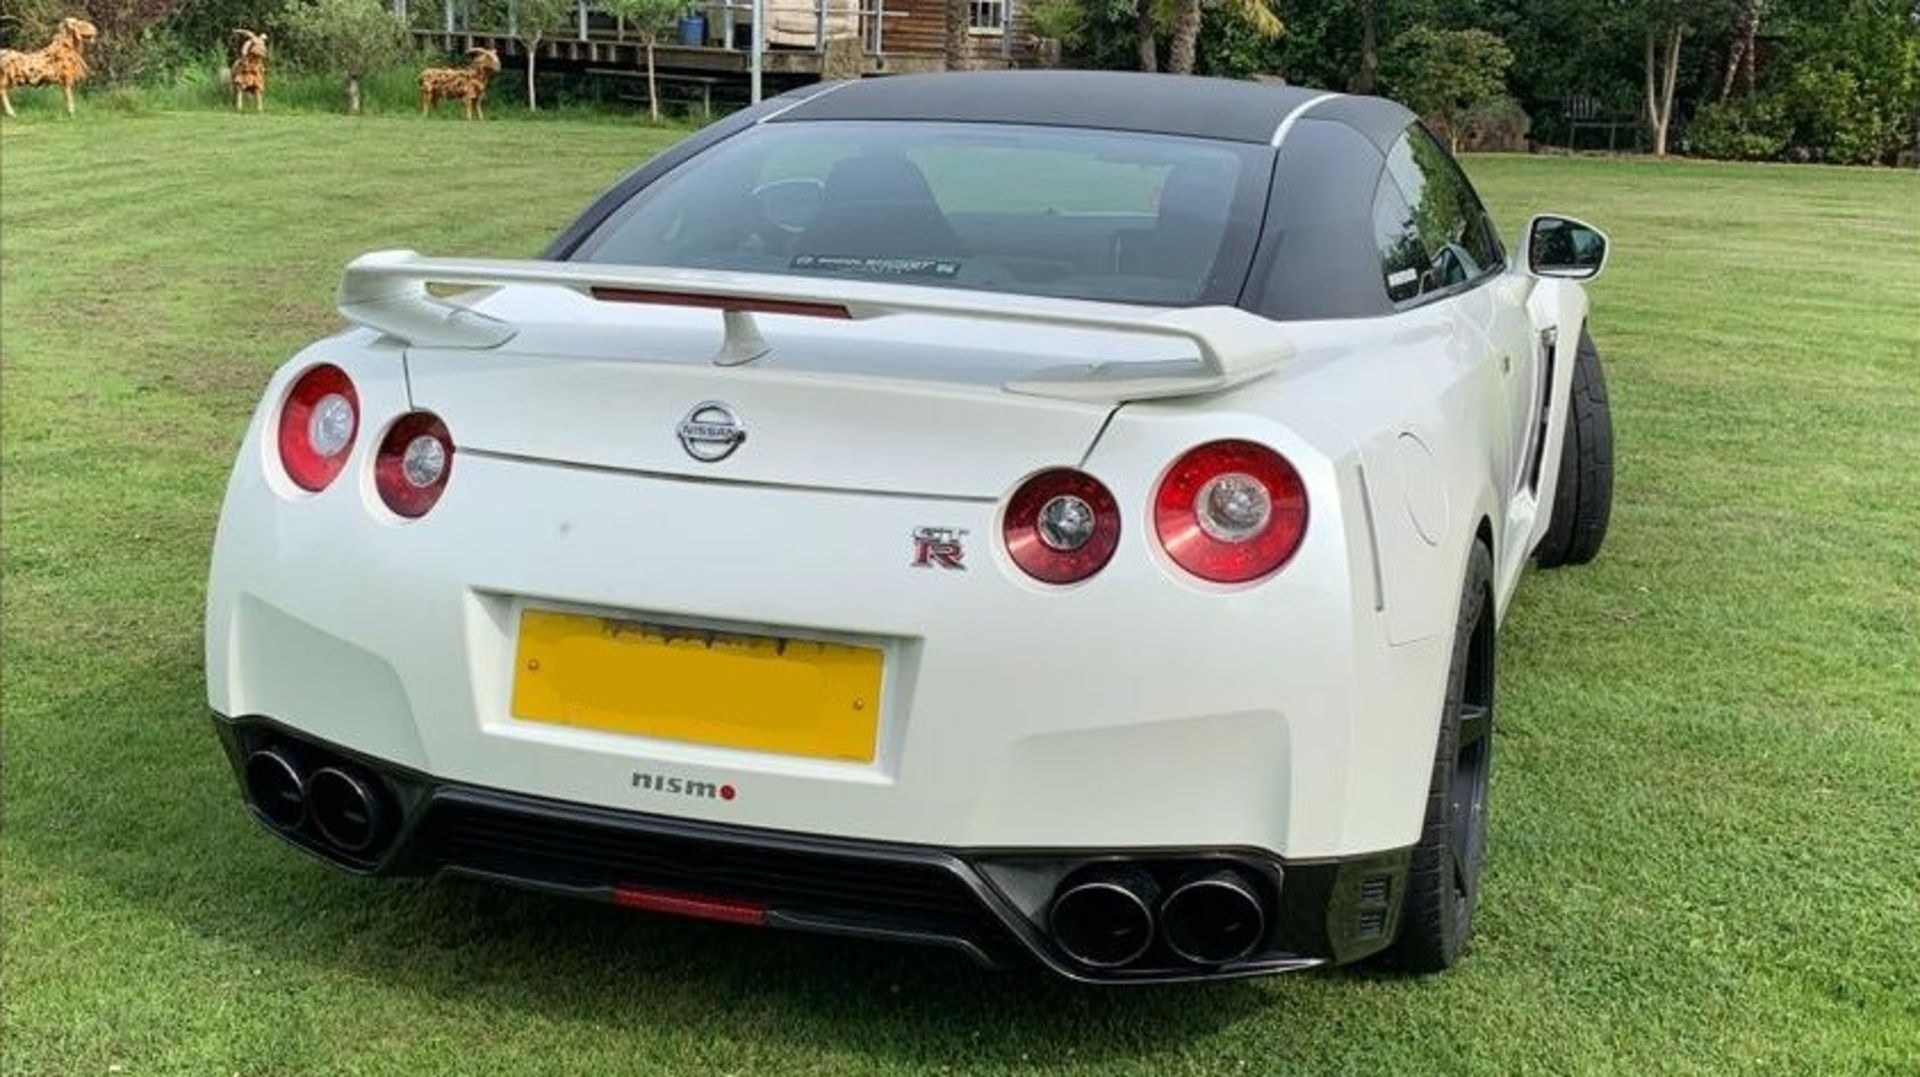 2011/11 REG NISSAN GT-R R35 PREMIUM EDITION S-A ONE FORMER KEEPER FROM NEW 22K MILES - WARRANTED! - Image 8 of 22